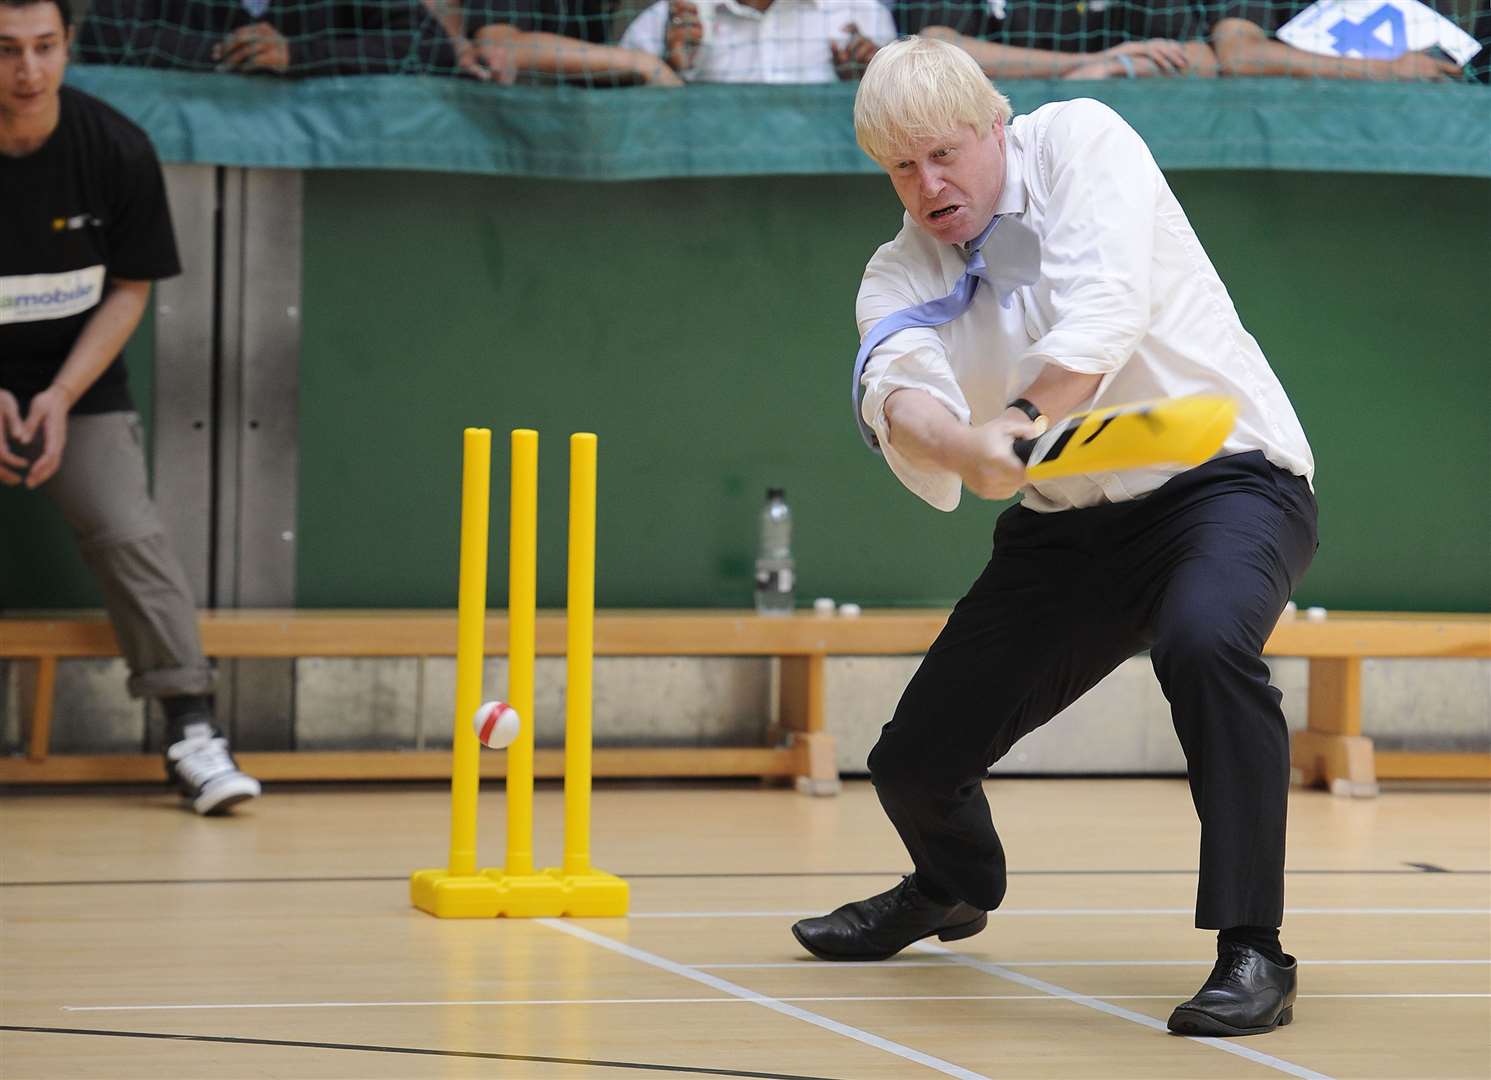 Taking part in a street cricket tournament in aid of charity in 2015 (Lauren Hurley/PA)